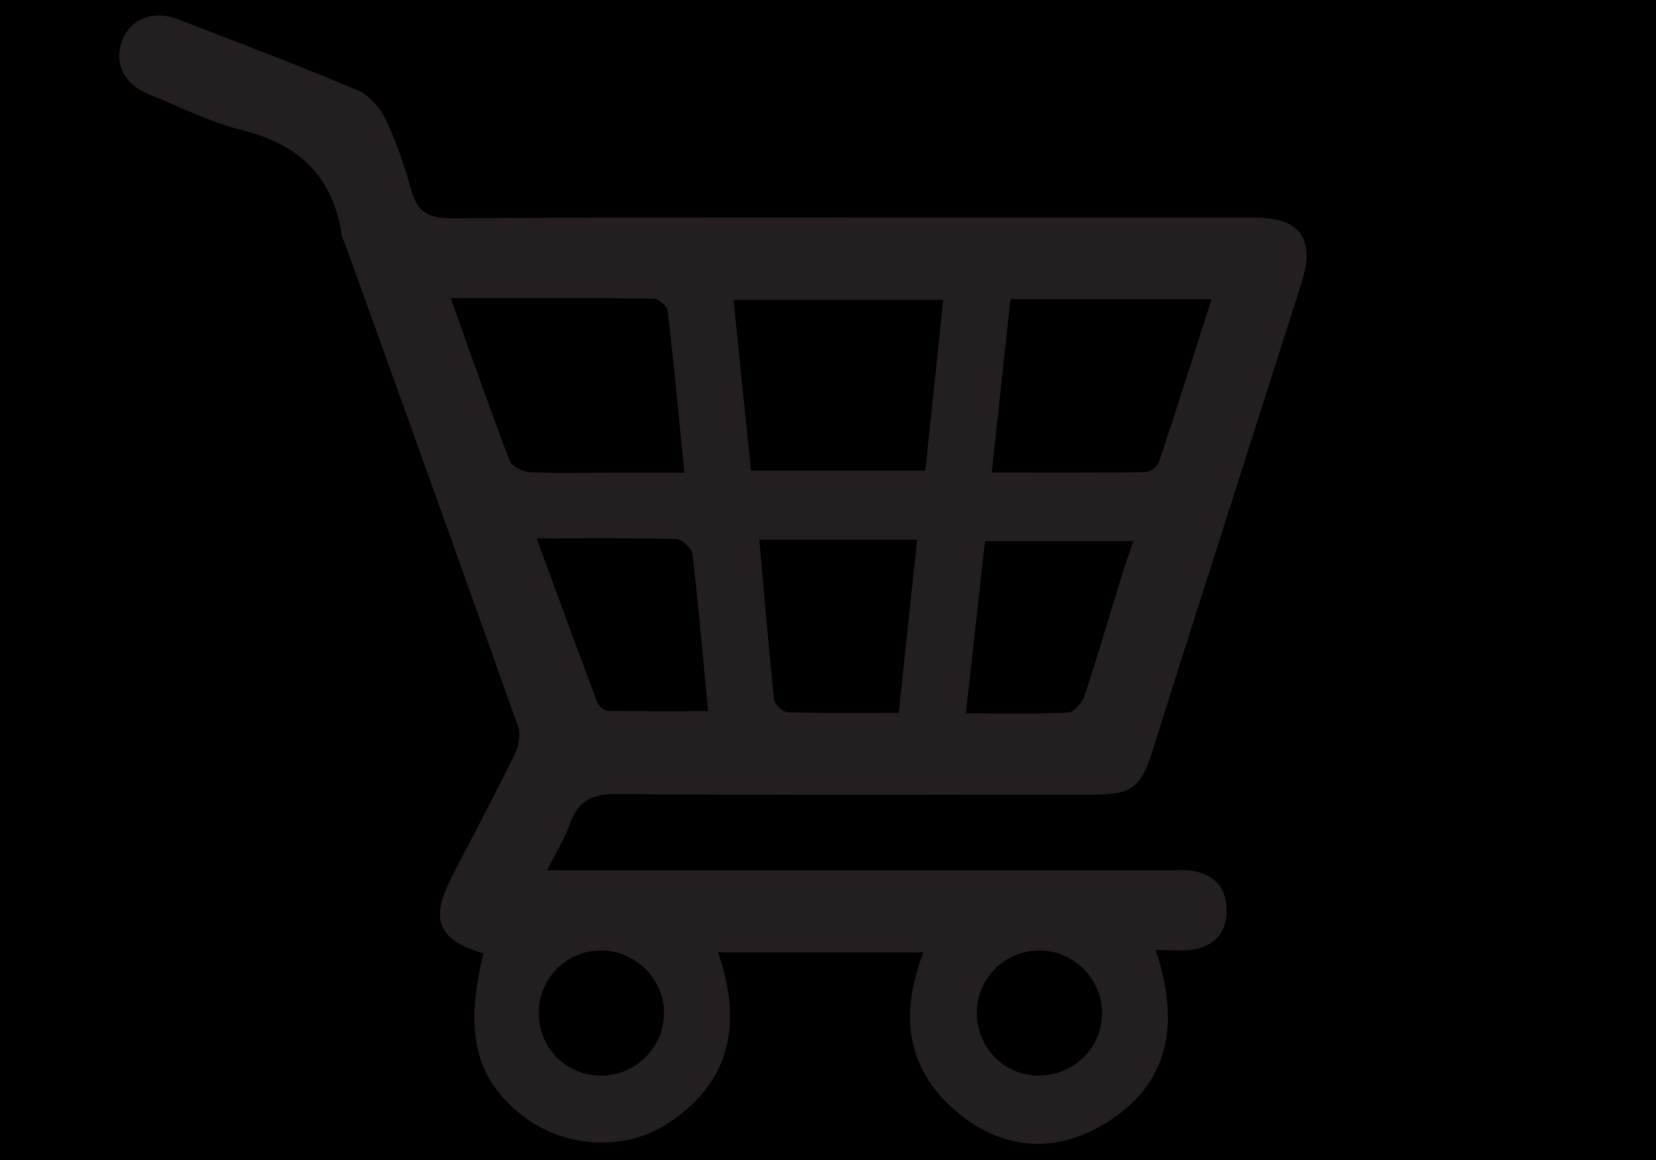 Shopping_Trolly_Clear.png - 43.33 kB